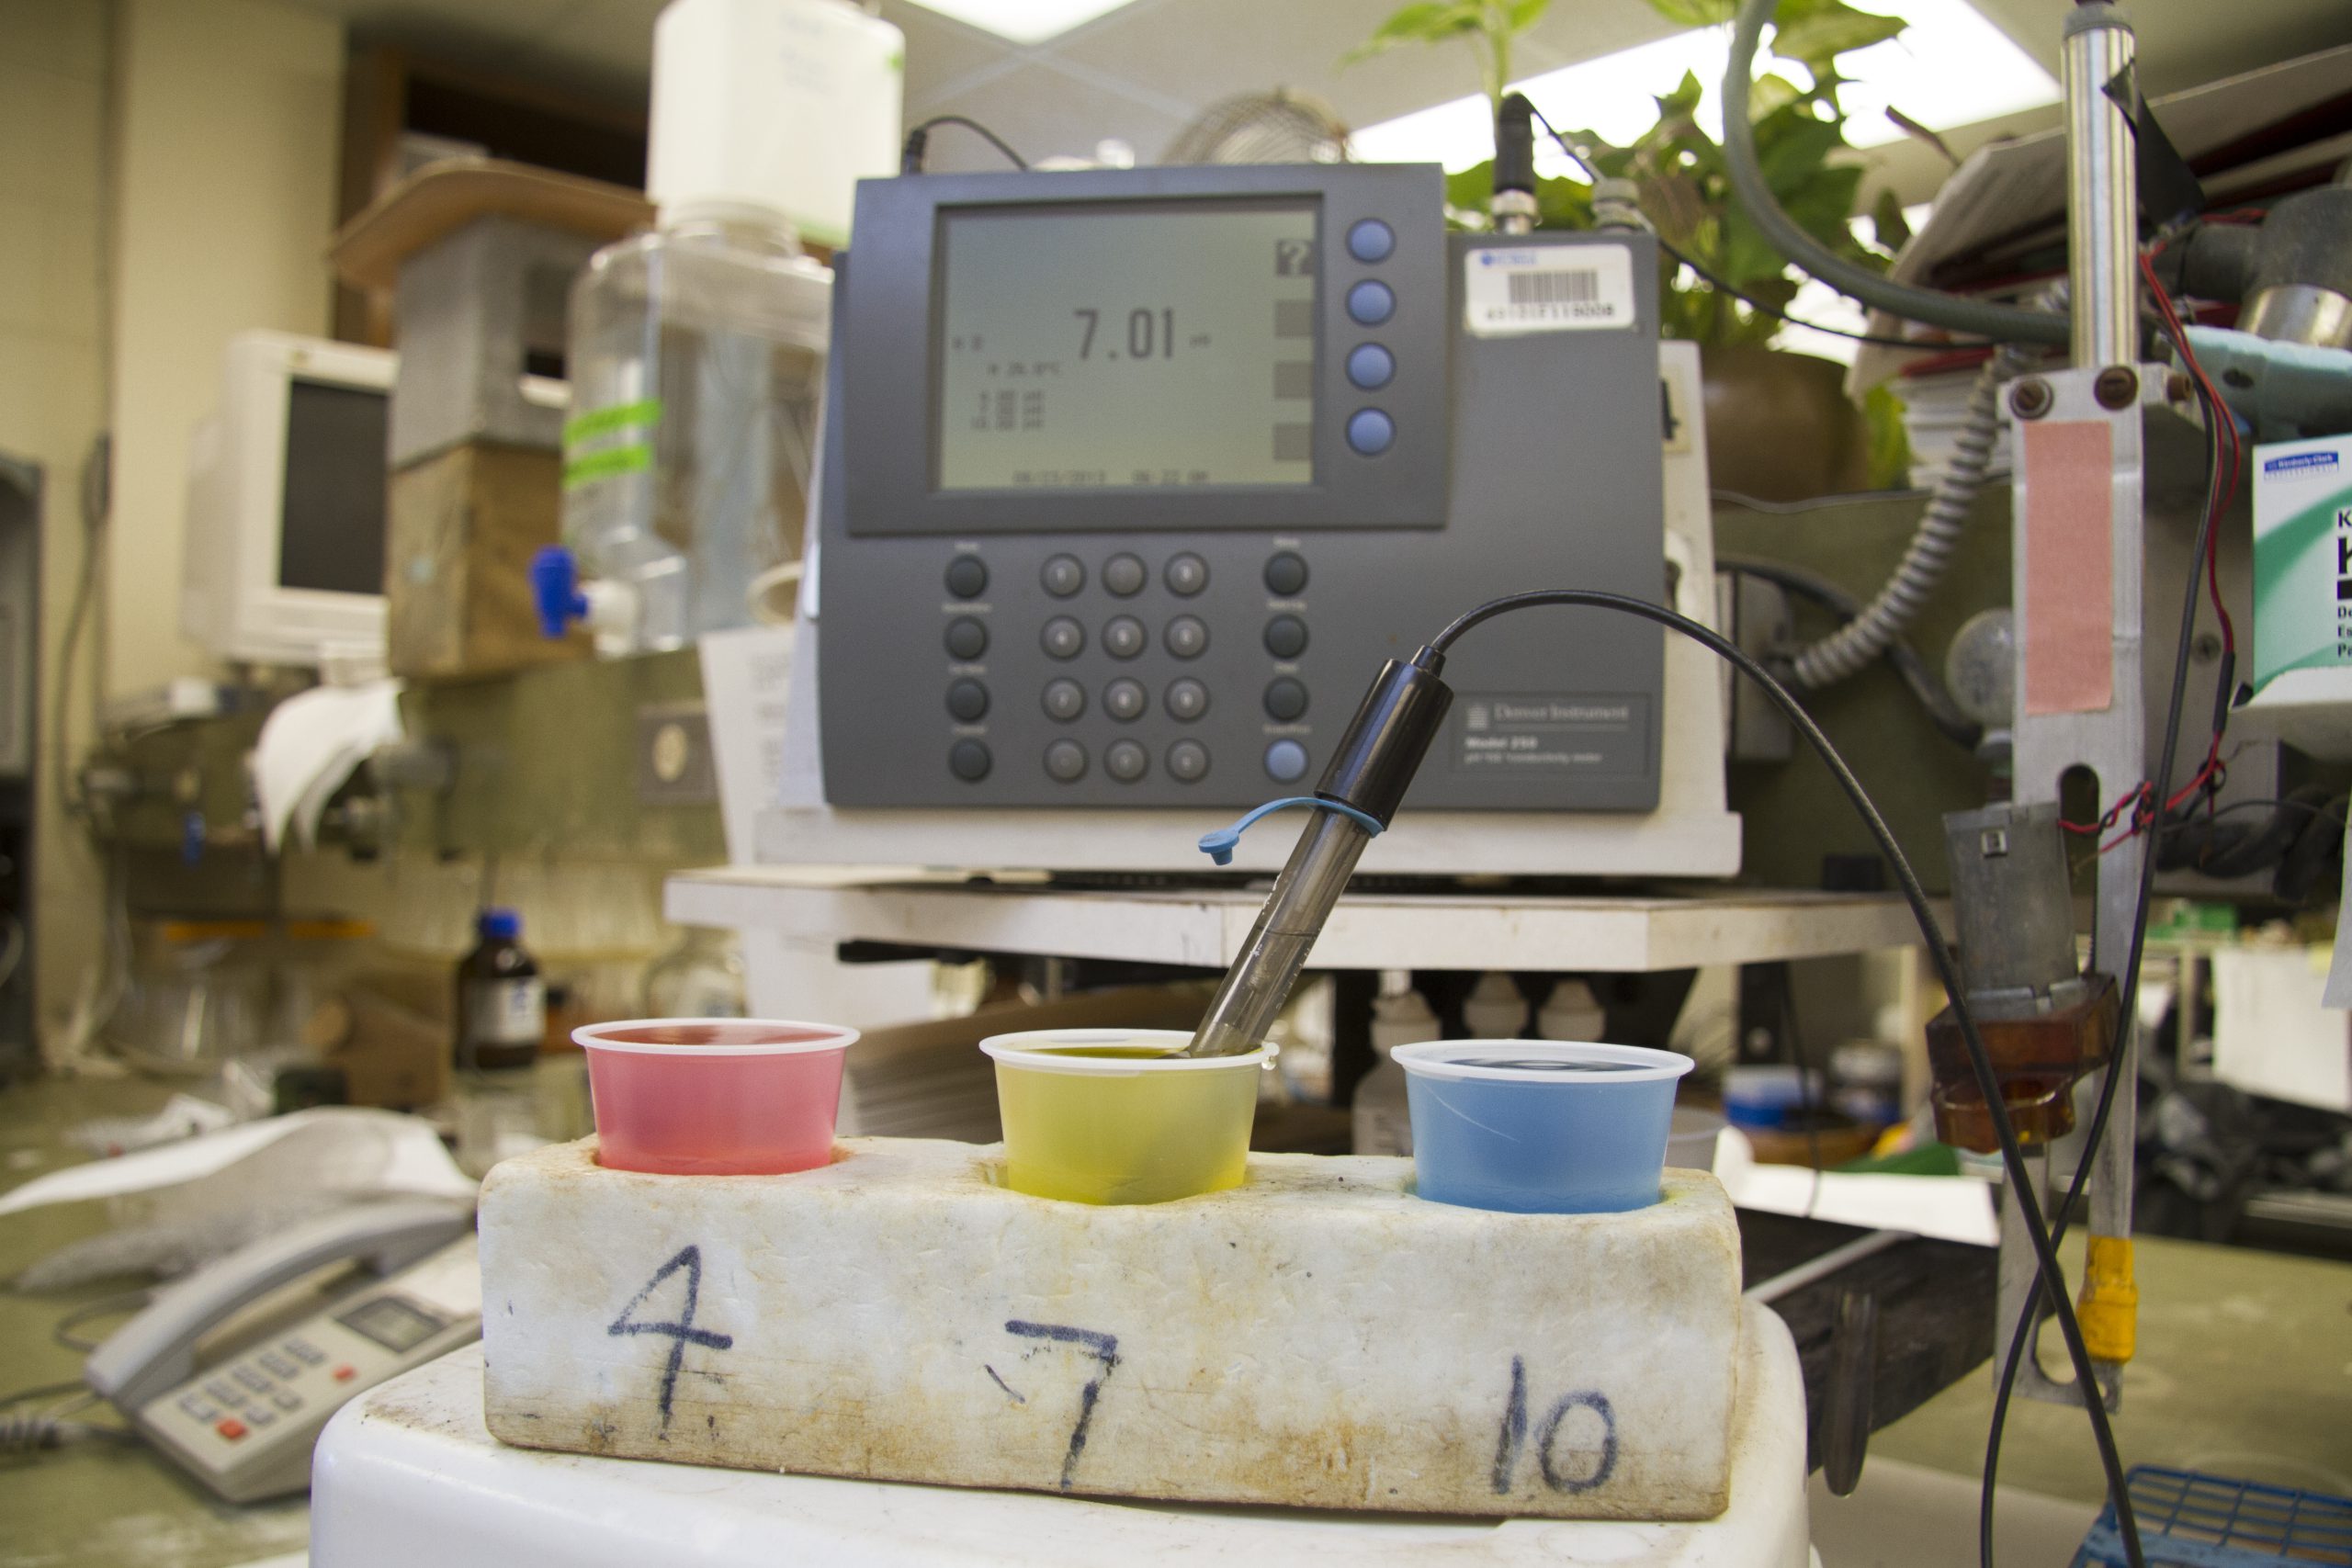 A PH testing machine at the UF Soils Testing Lab. There are 3 colored cups- pink is labeled 4, yellow is labeled 7, and blue is labeled 10. They are standards to known pH ranges to calibrate the machine for accuracy.